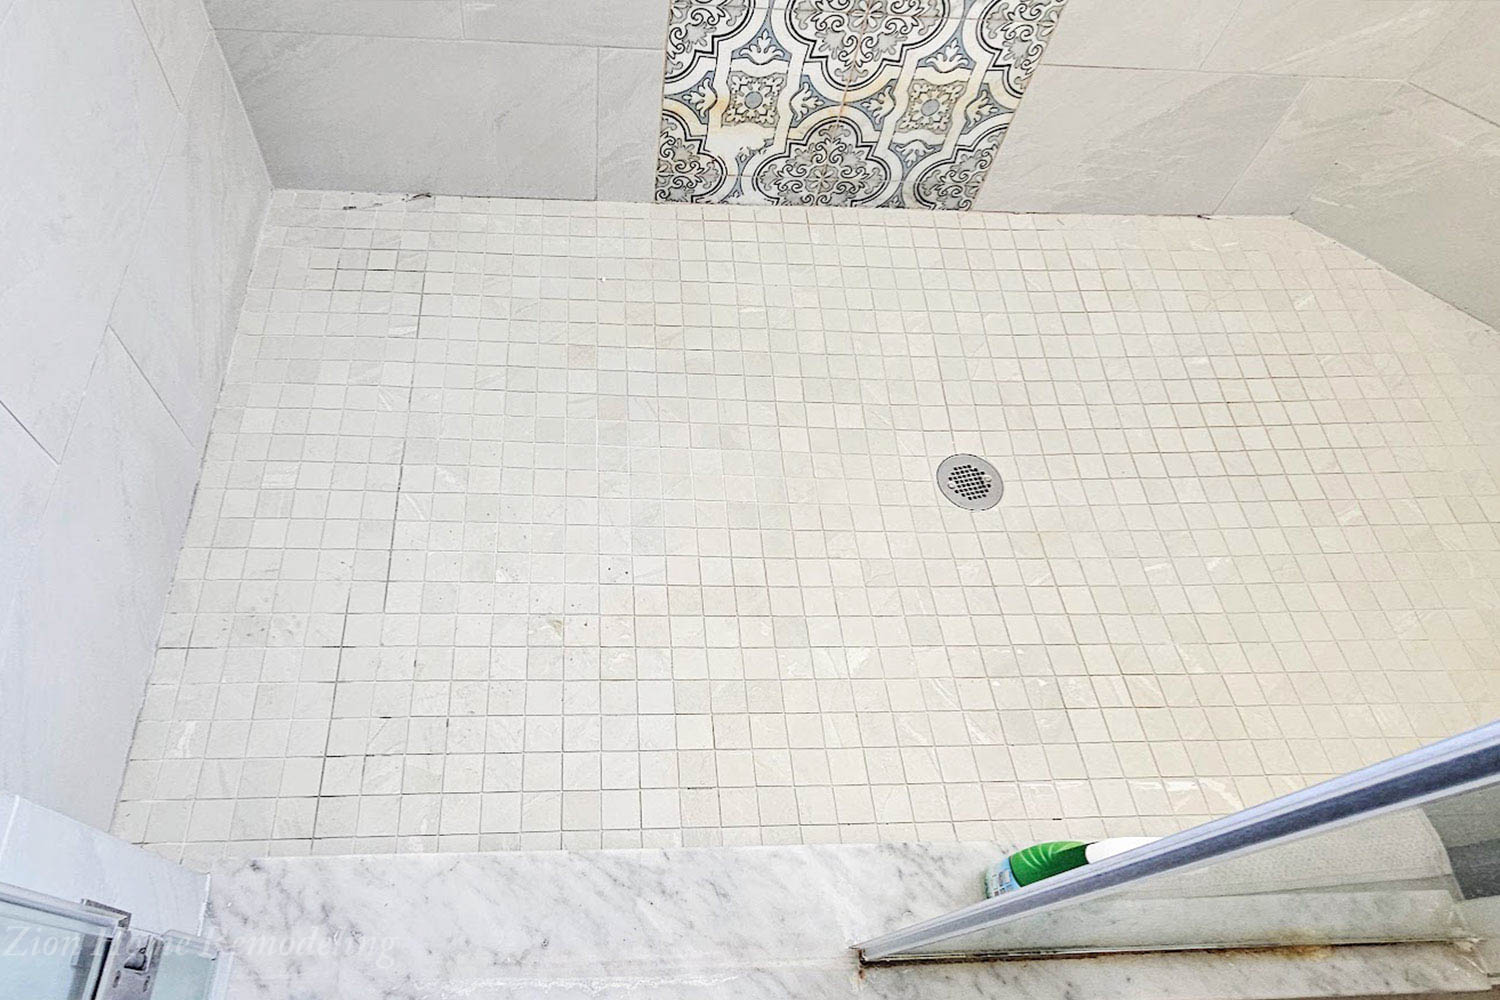 Discolored and stained mosaic shower tiles with failing caulk between tiles and shower floor.